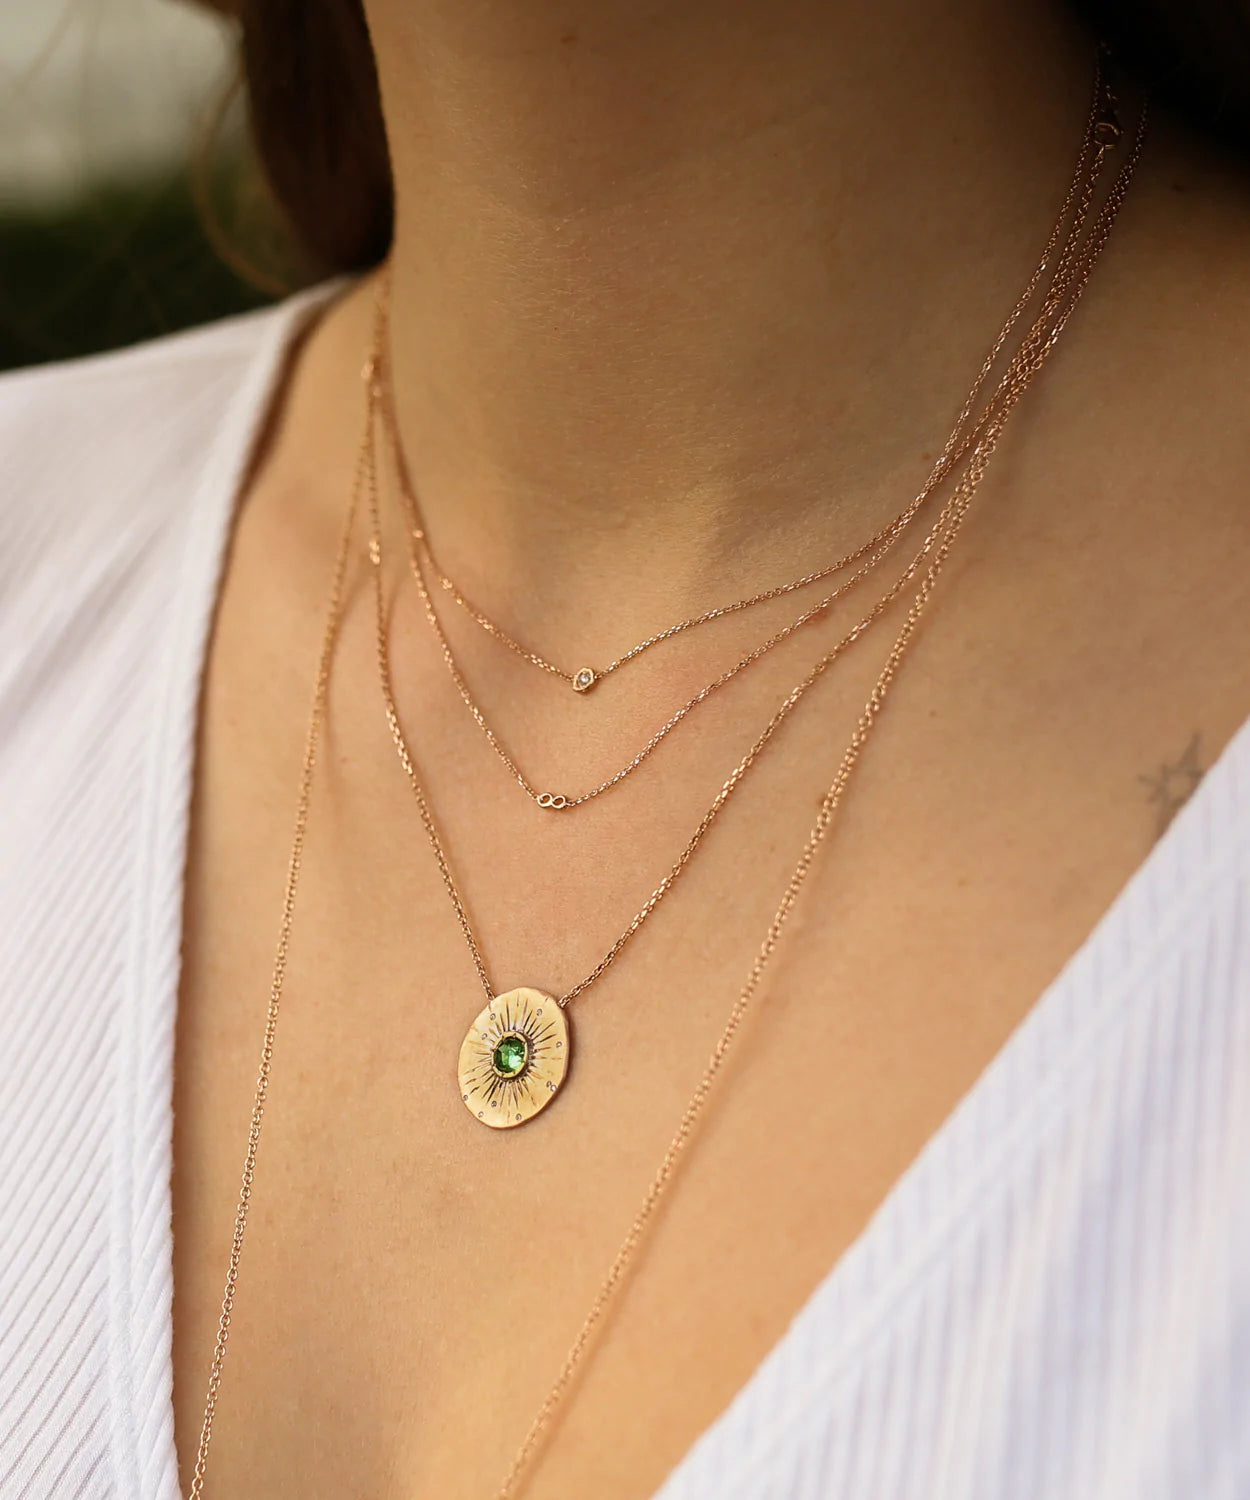 etched sea disc necklace - green tourmaline